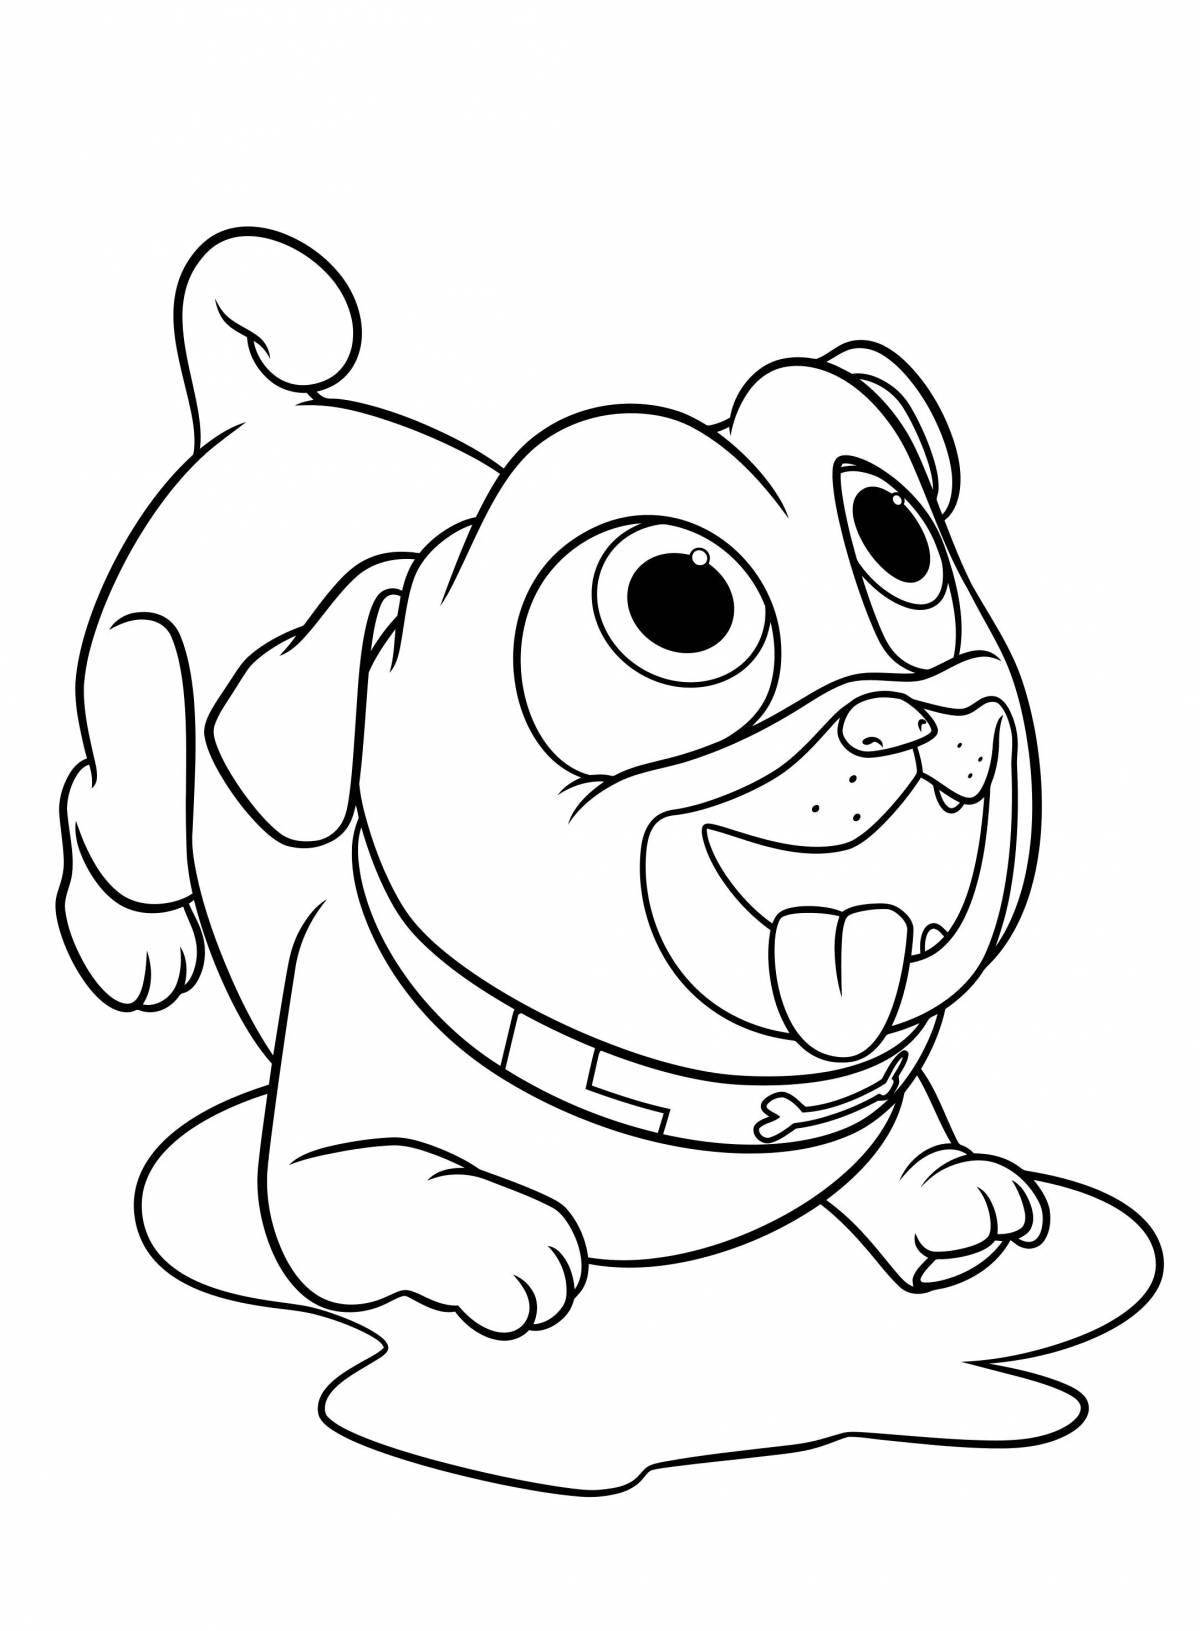 Attractive pug coloring book for kids